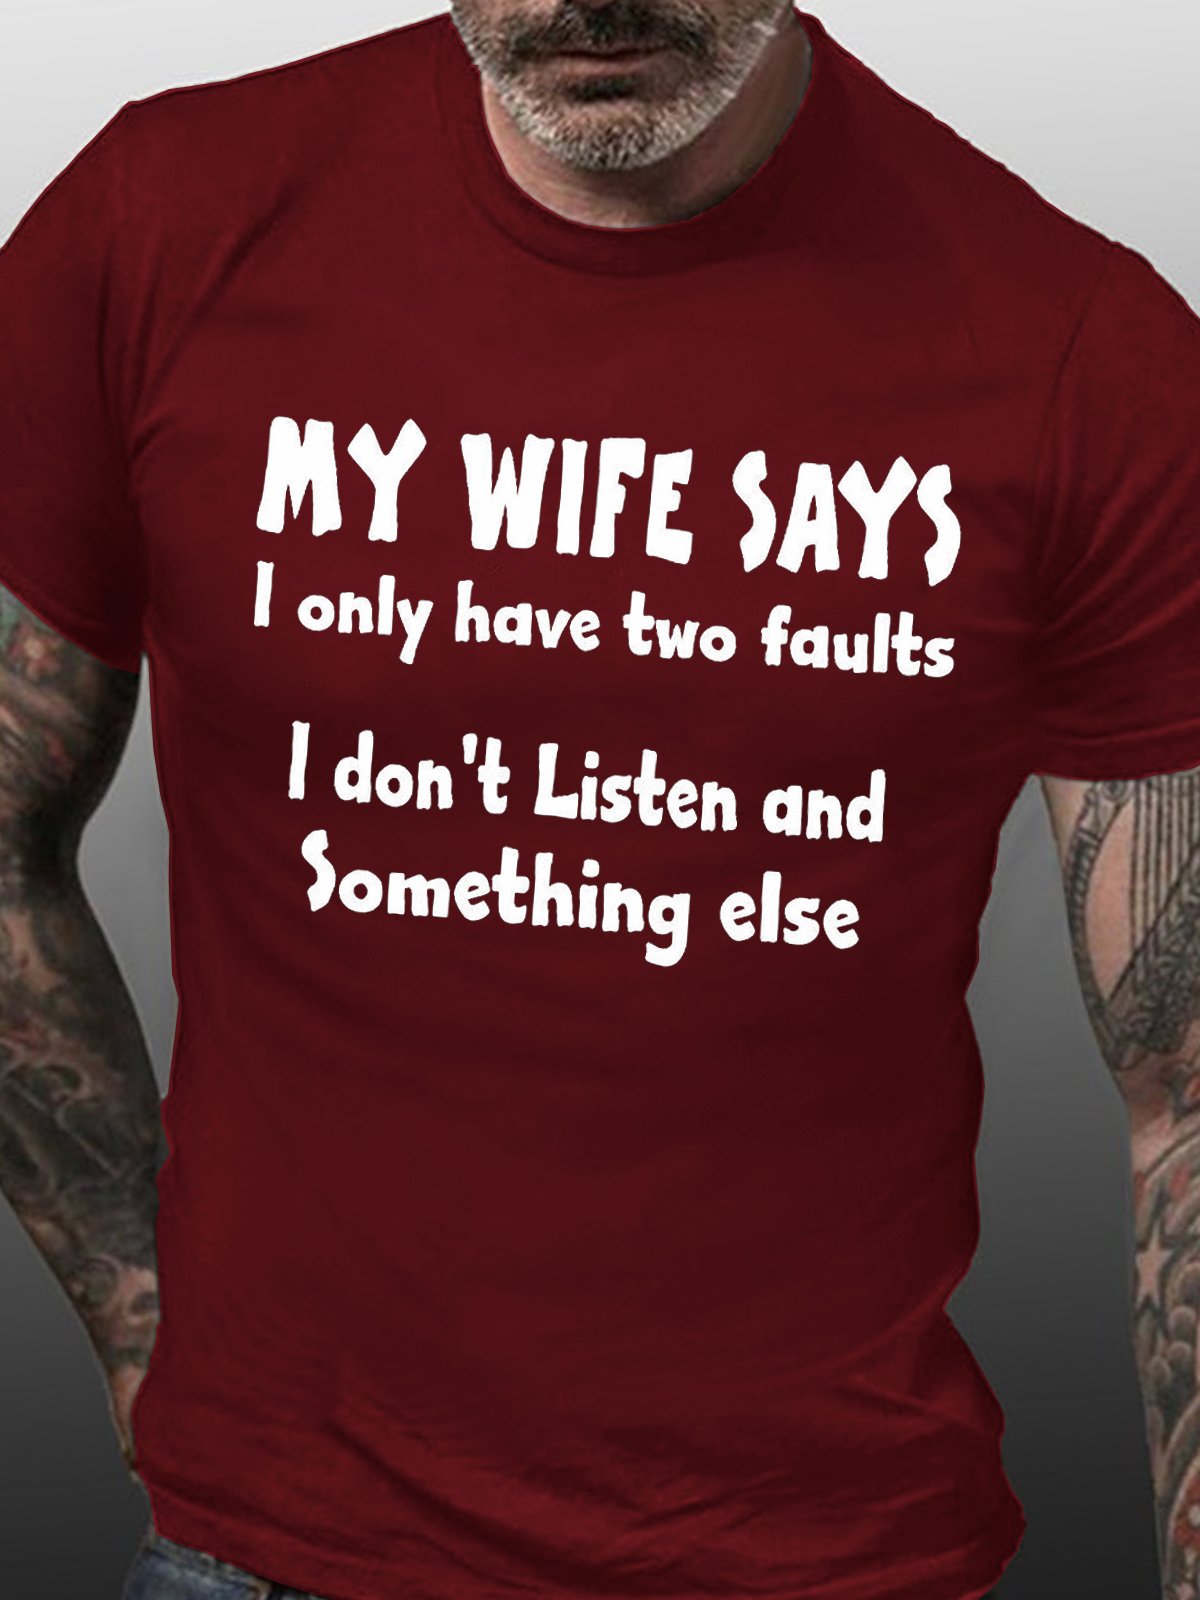 MY WIFE SAYS I HAVE TWO FAULTS I DONT LISTEN AND SOMETHING ELSEC Short Sleeve Shirts & Tops